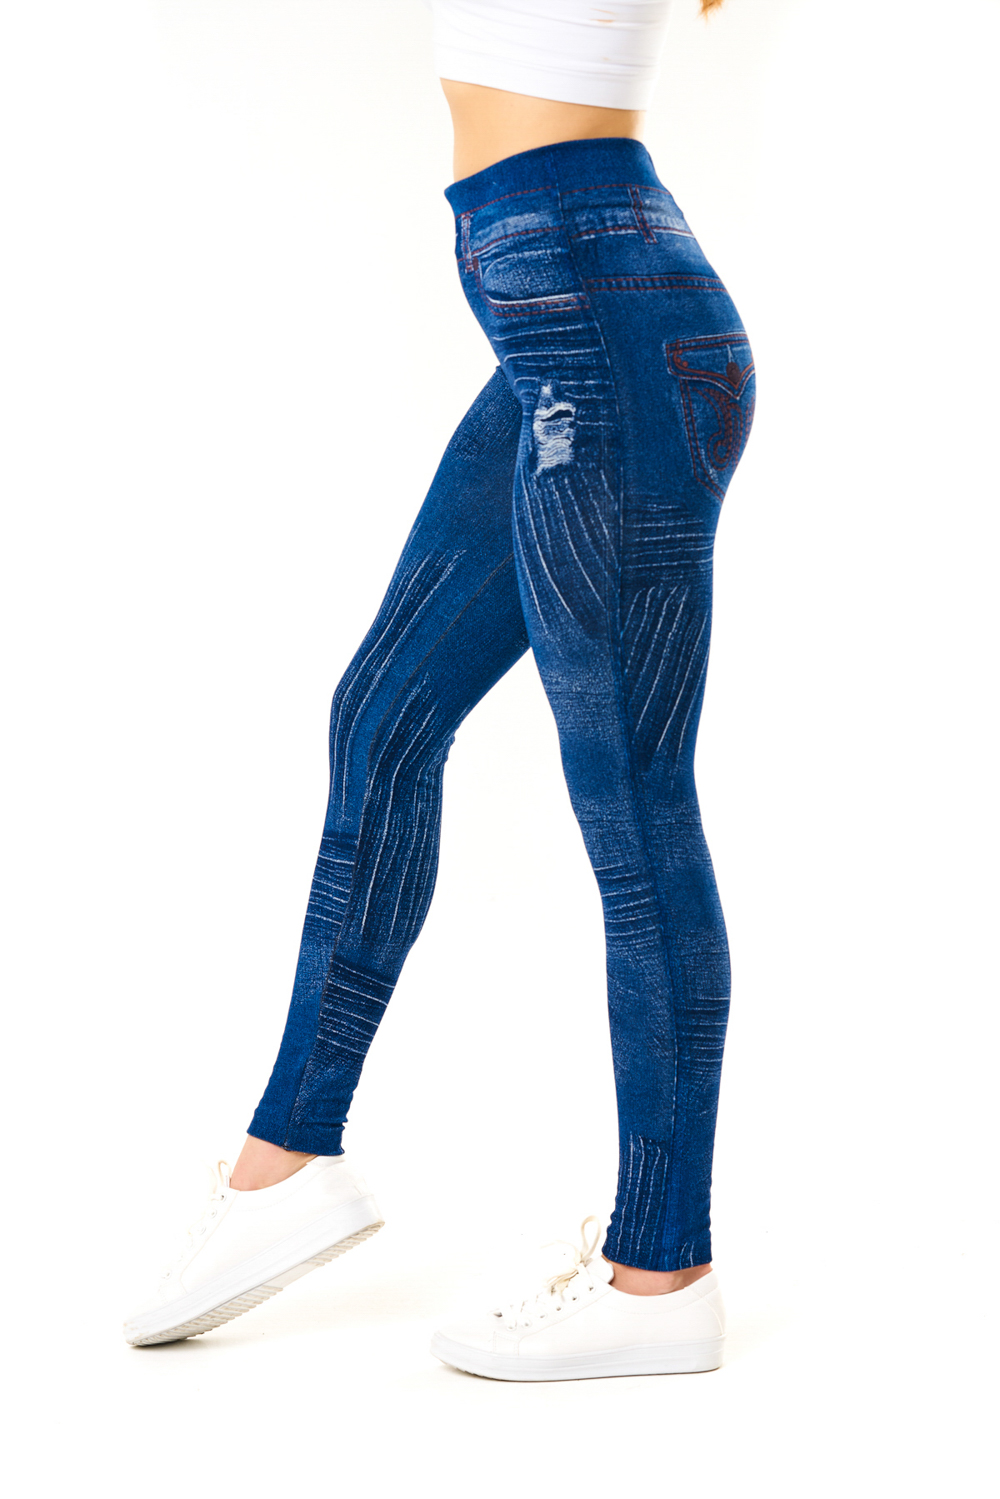 Denim Leggings with Ripped Look Distressed and Floral Pattern - 5